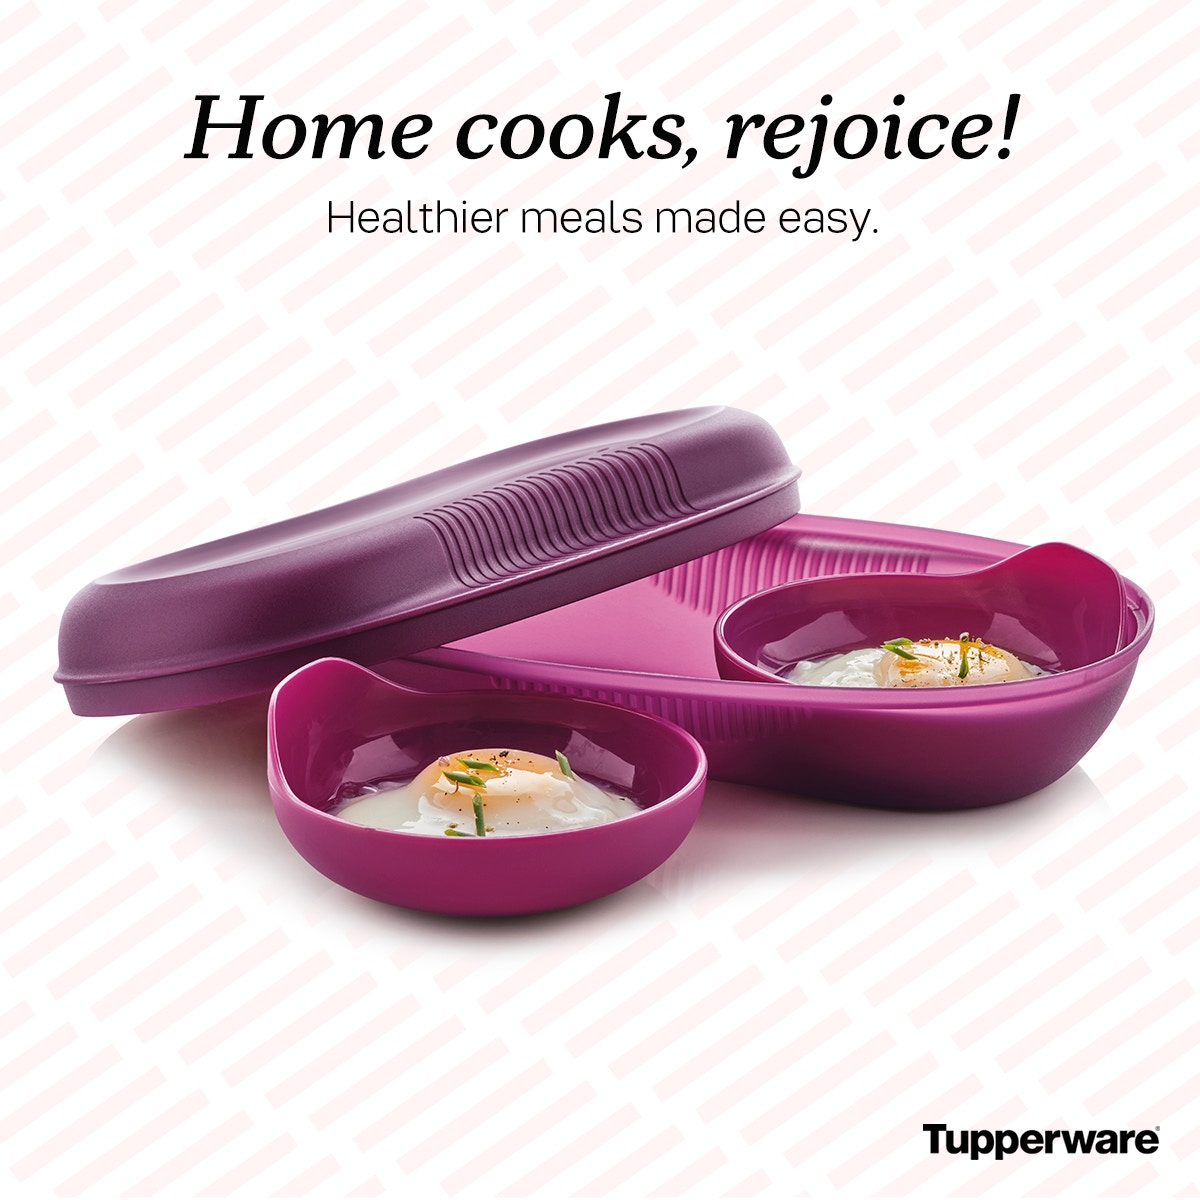 Yes! I have Tupperware! on Twitter: Breakfast is my son's favorite product. He can have eggs in 1 minute and 30 Perfect for a very hungry 17-year-old with